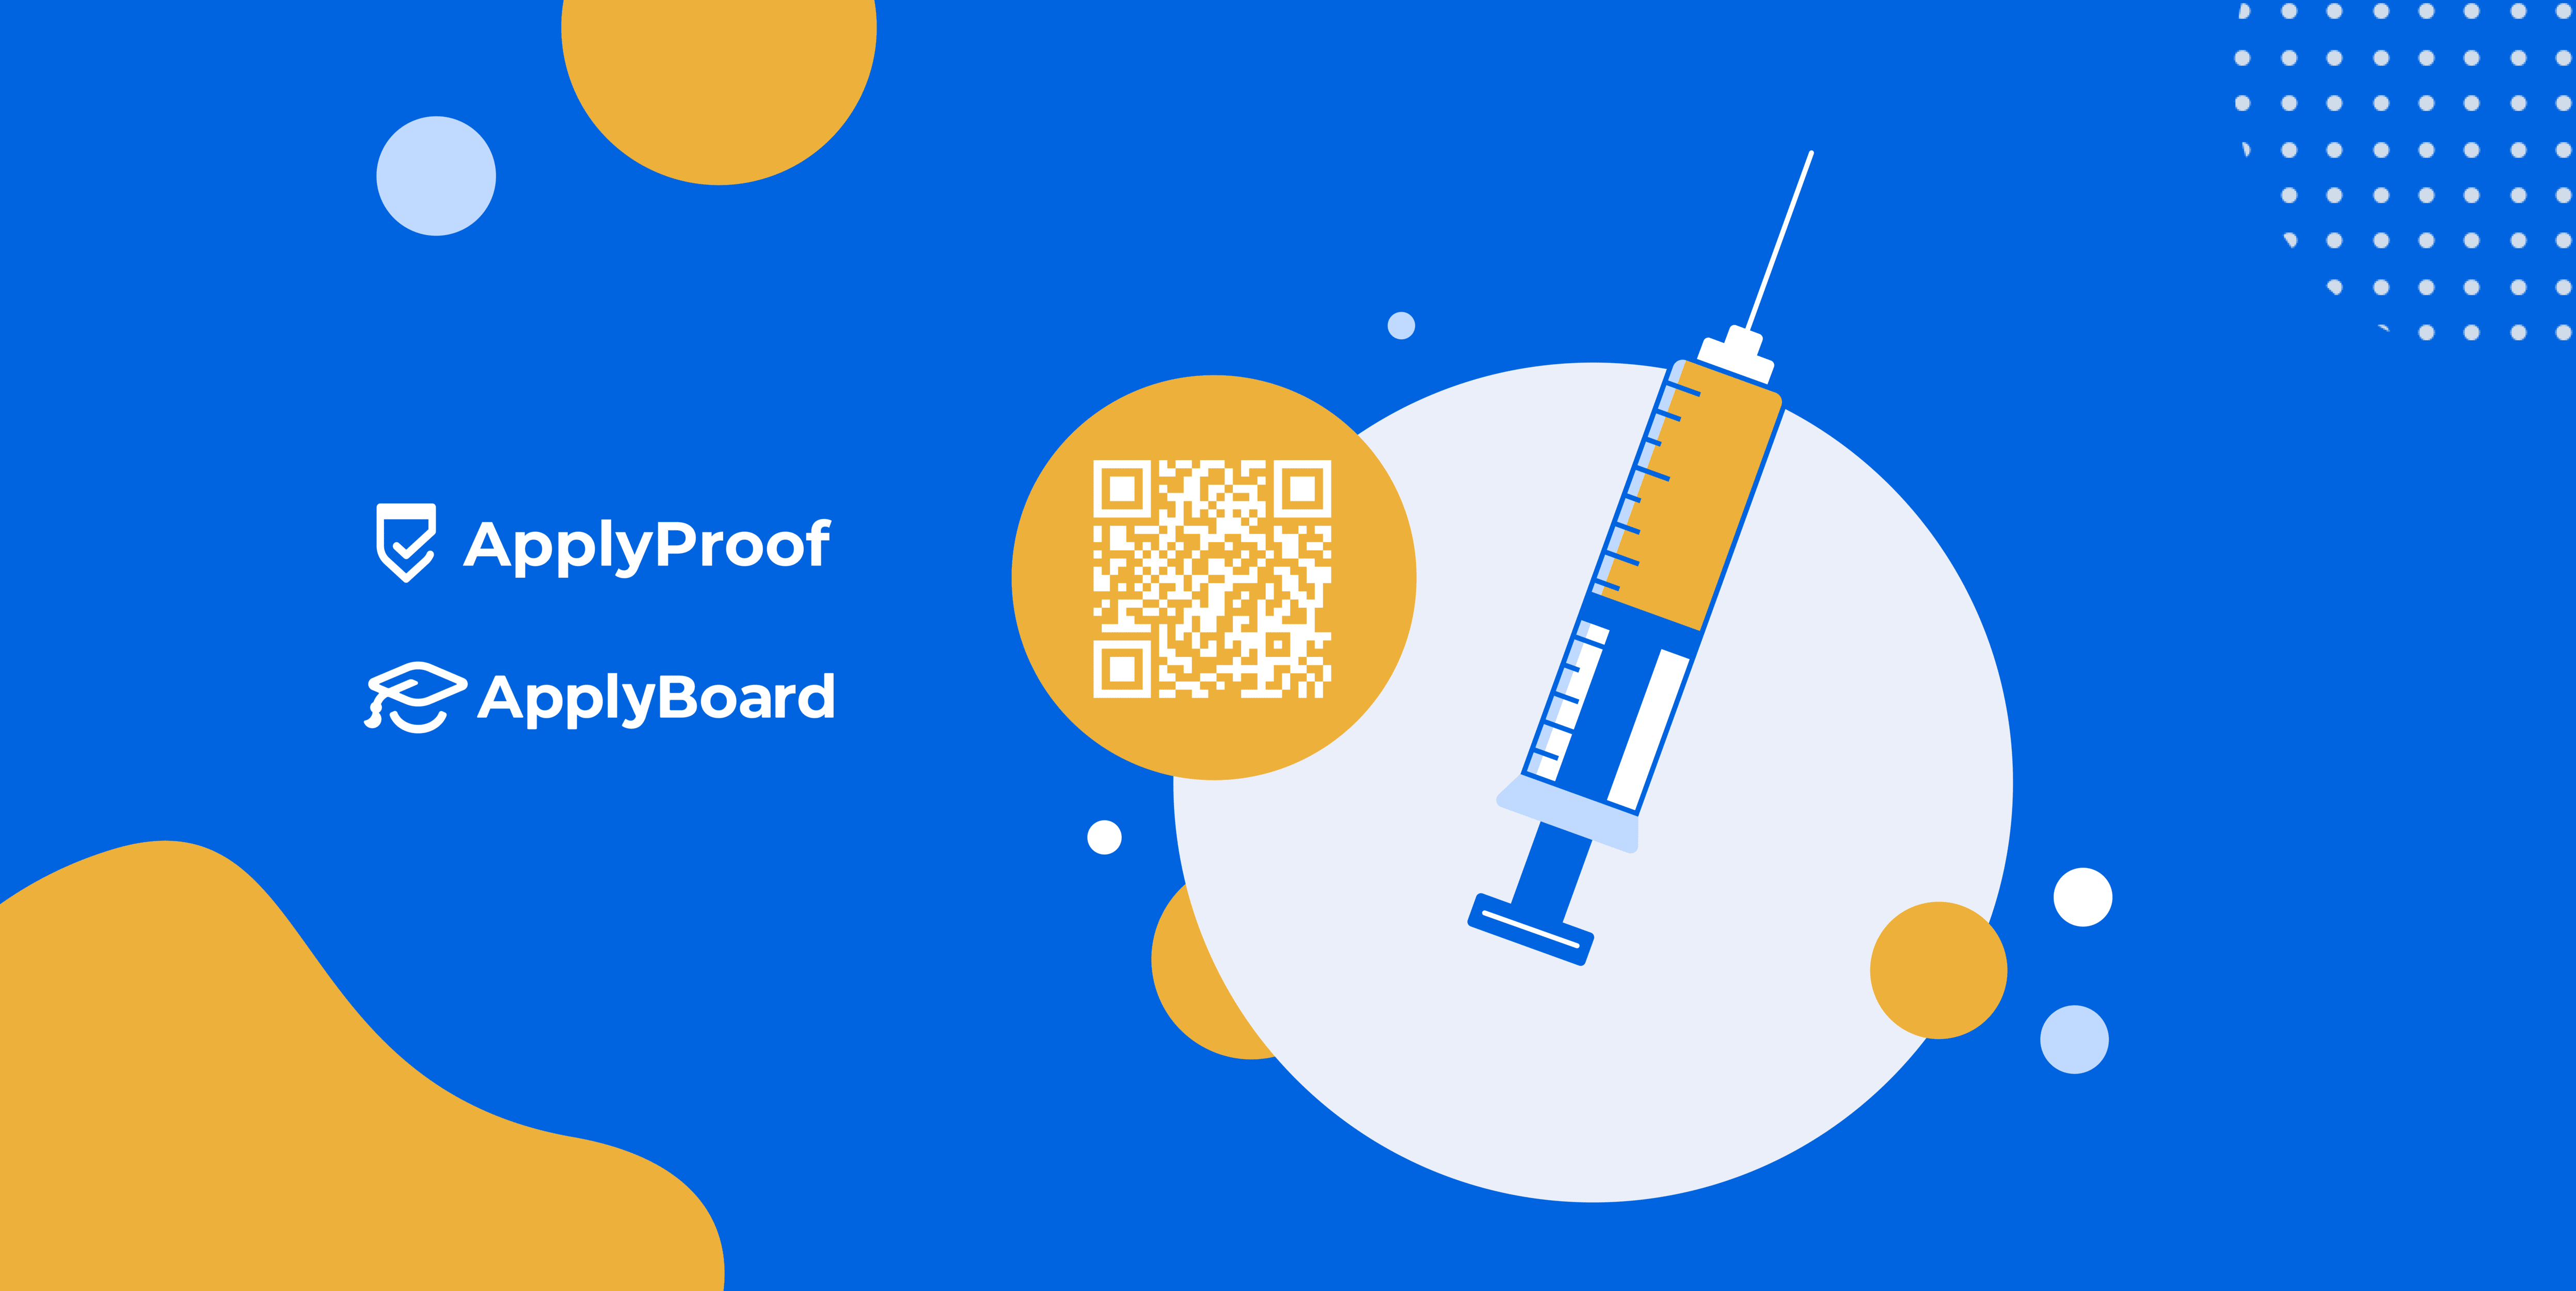 An illustration of ApplyBoard's ShowMyProof user interface.